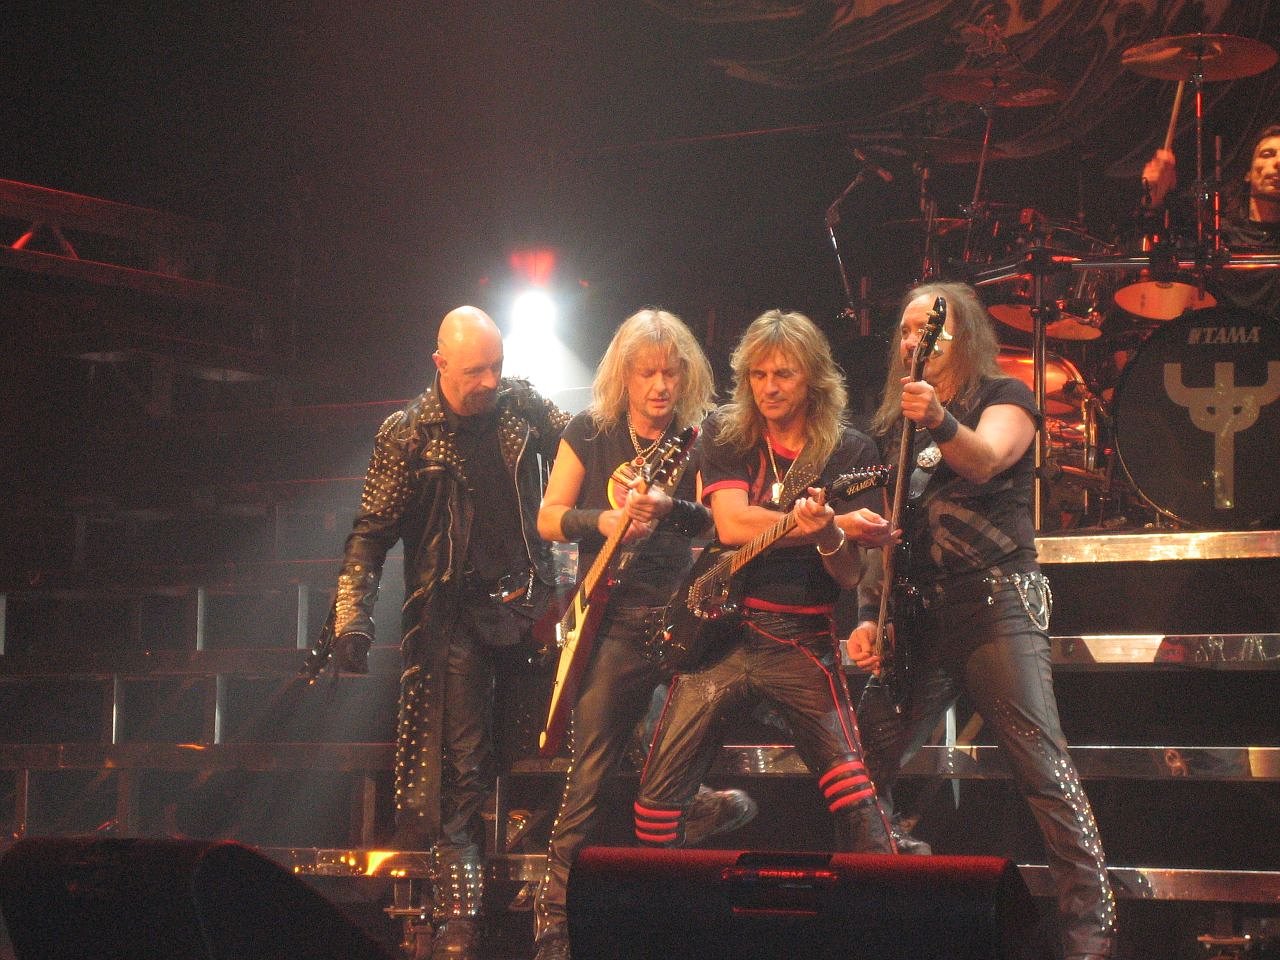 Judas Priest. One of my favorites of the day. My mom hated them...lol.